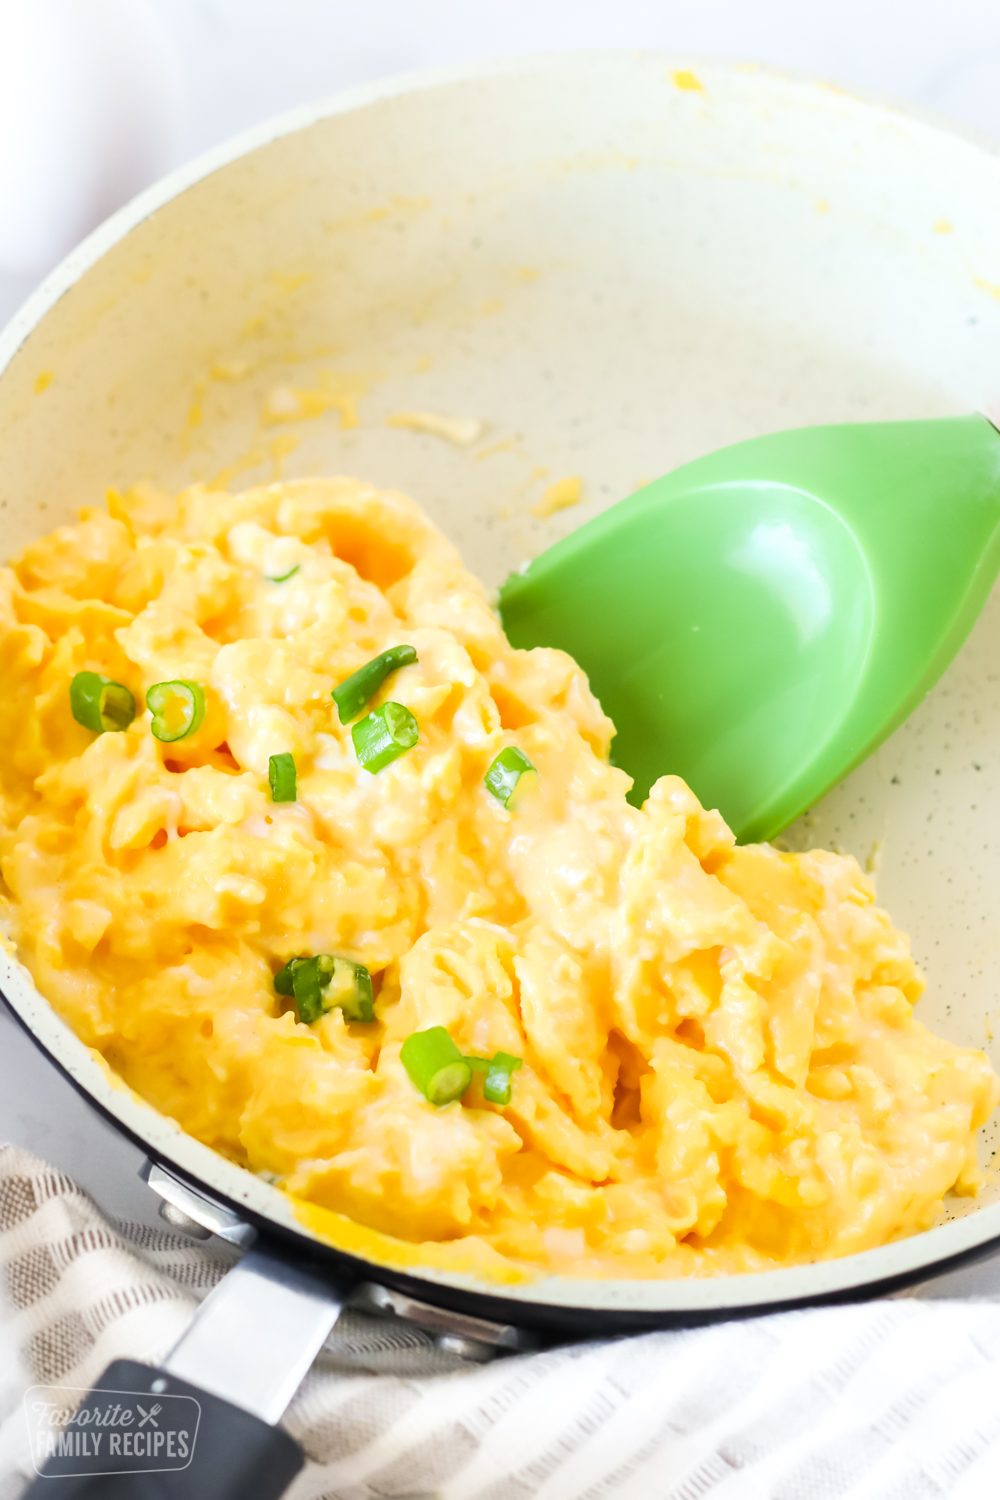 Close up of scrambled eggs in a pan with a green spatula underneath ready to lift the eggs from the pan.